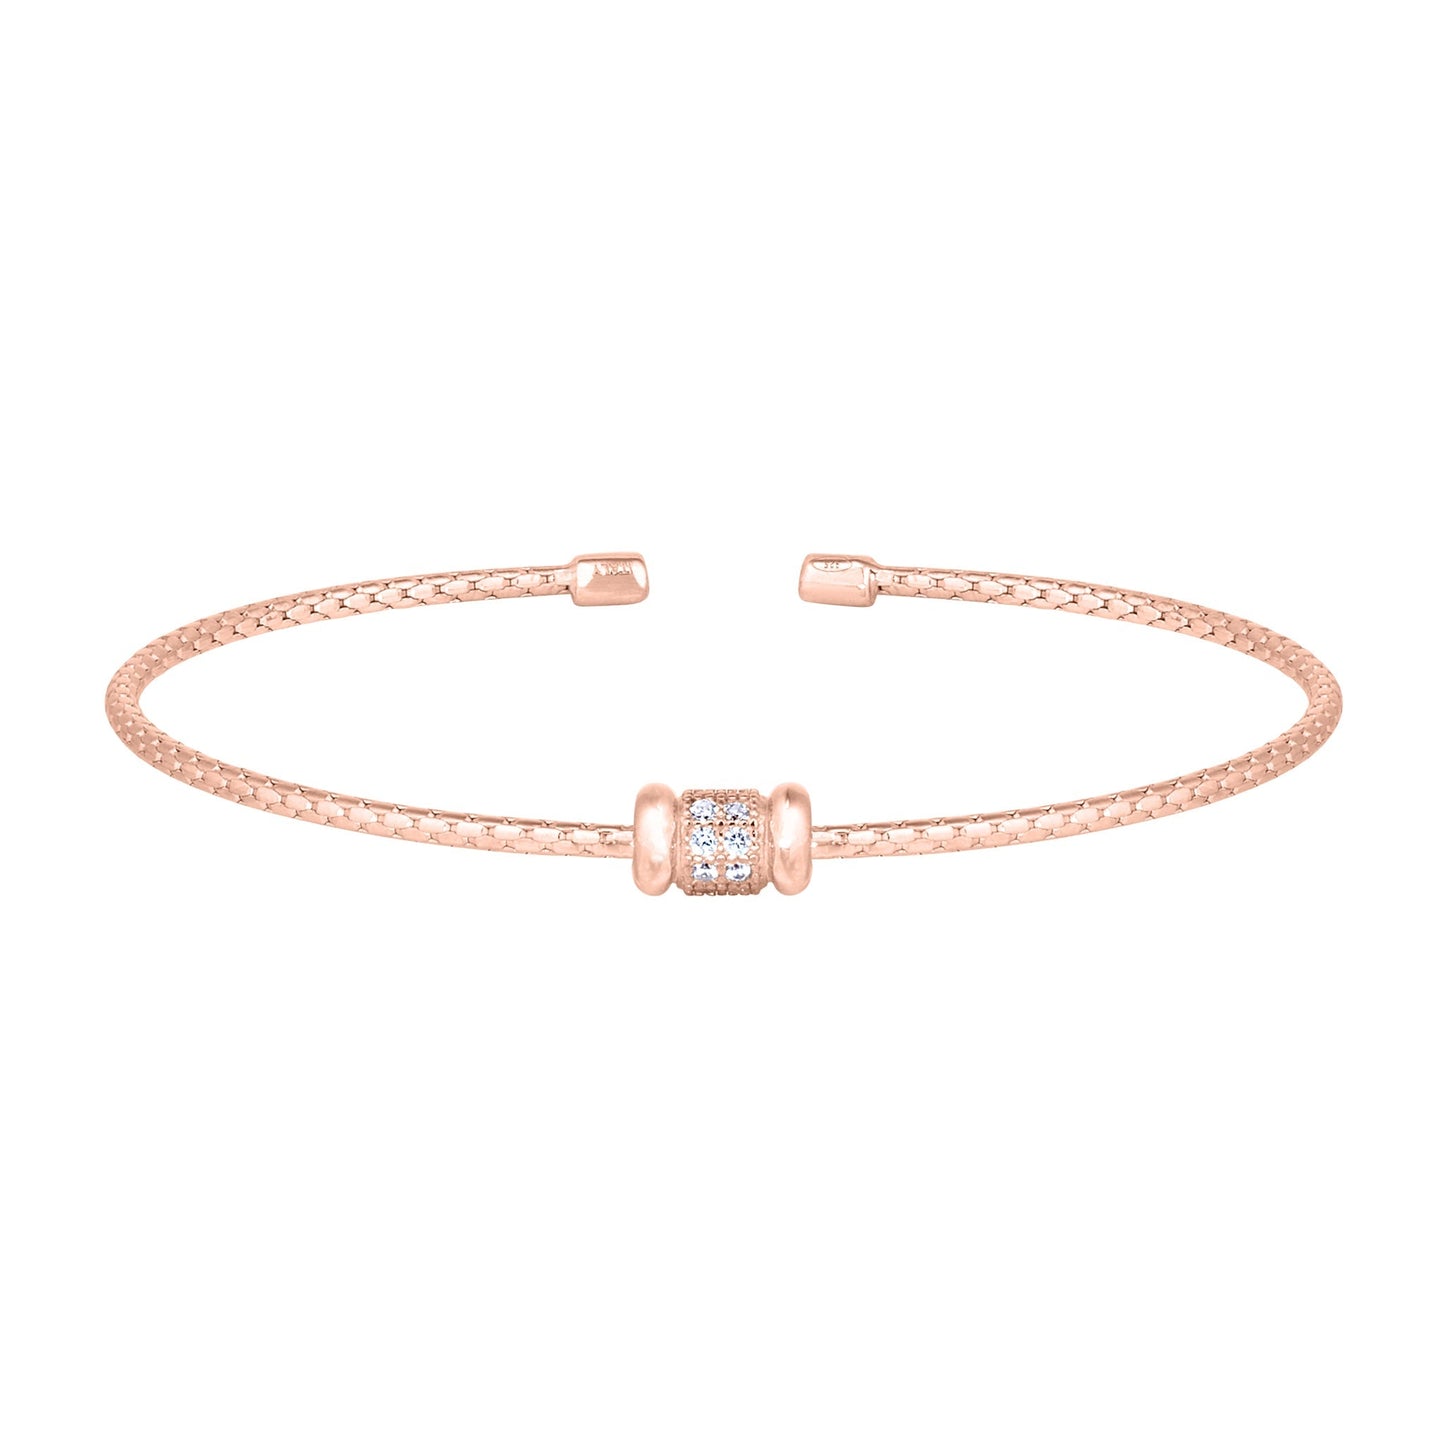 A cable bracelet with circular bar accent and simulated diamonds displayed on a neutral white background.